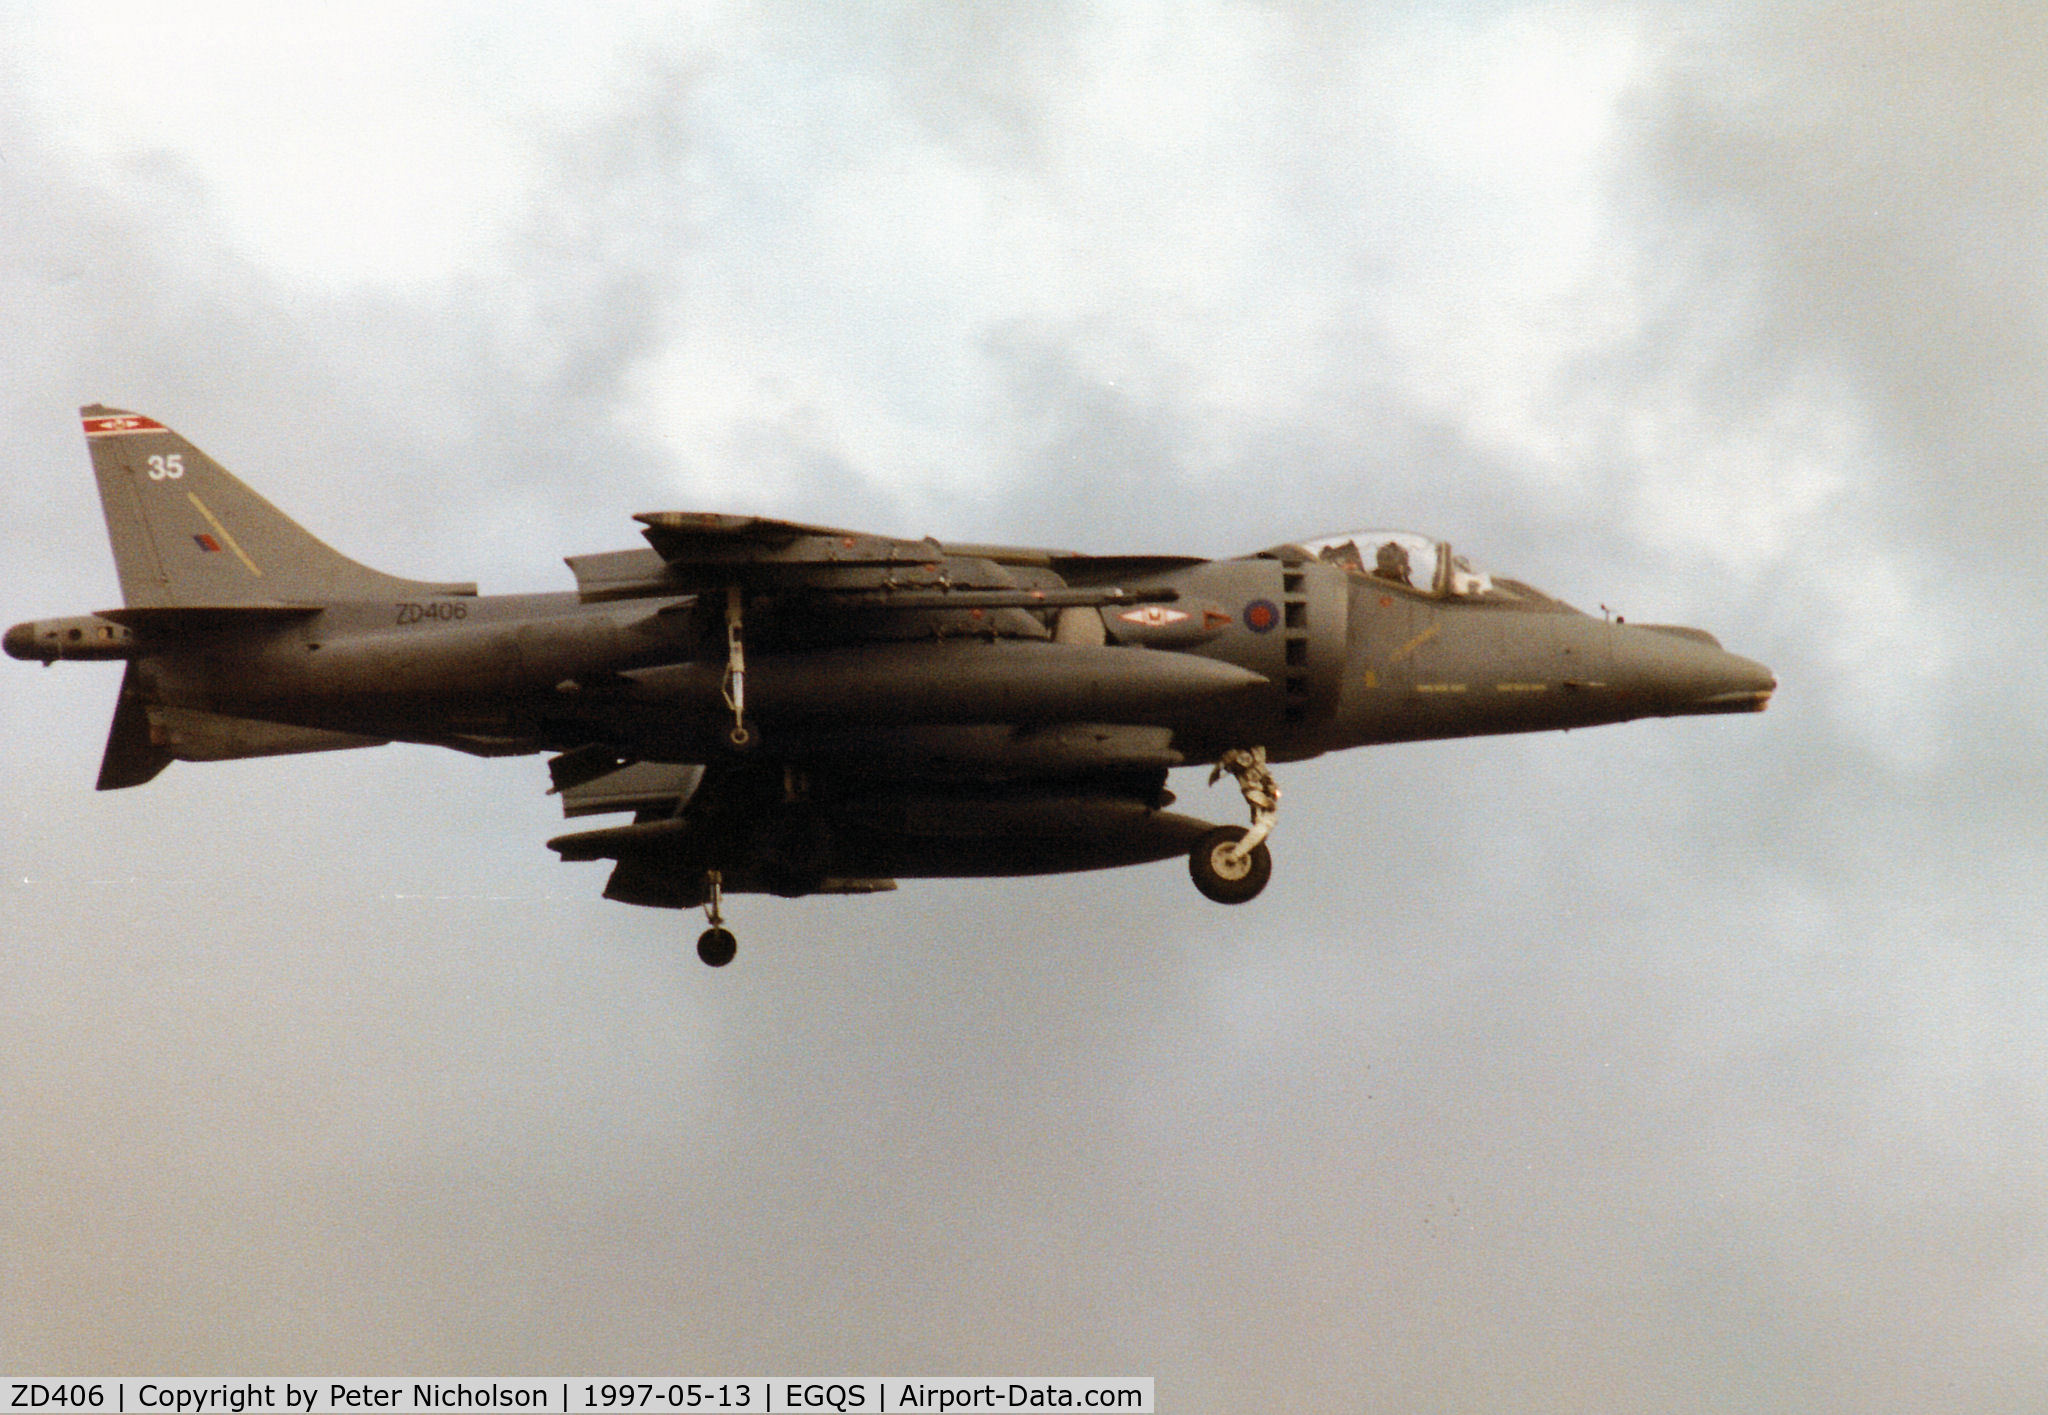 ZD406, 1989 British Aerospace Harrier GR.7 C/N P35, Harrier GR.7, callsign Wellard 1, of 1Squadron at RAF Wittering on final approach to RAF Lossiemouth in the Summer of 1997.